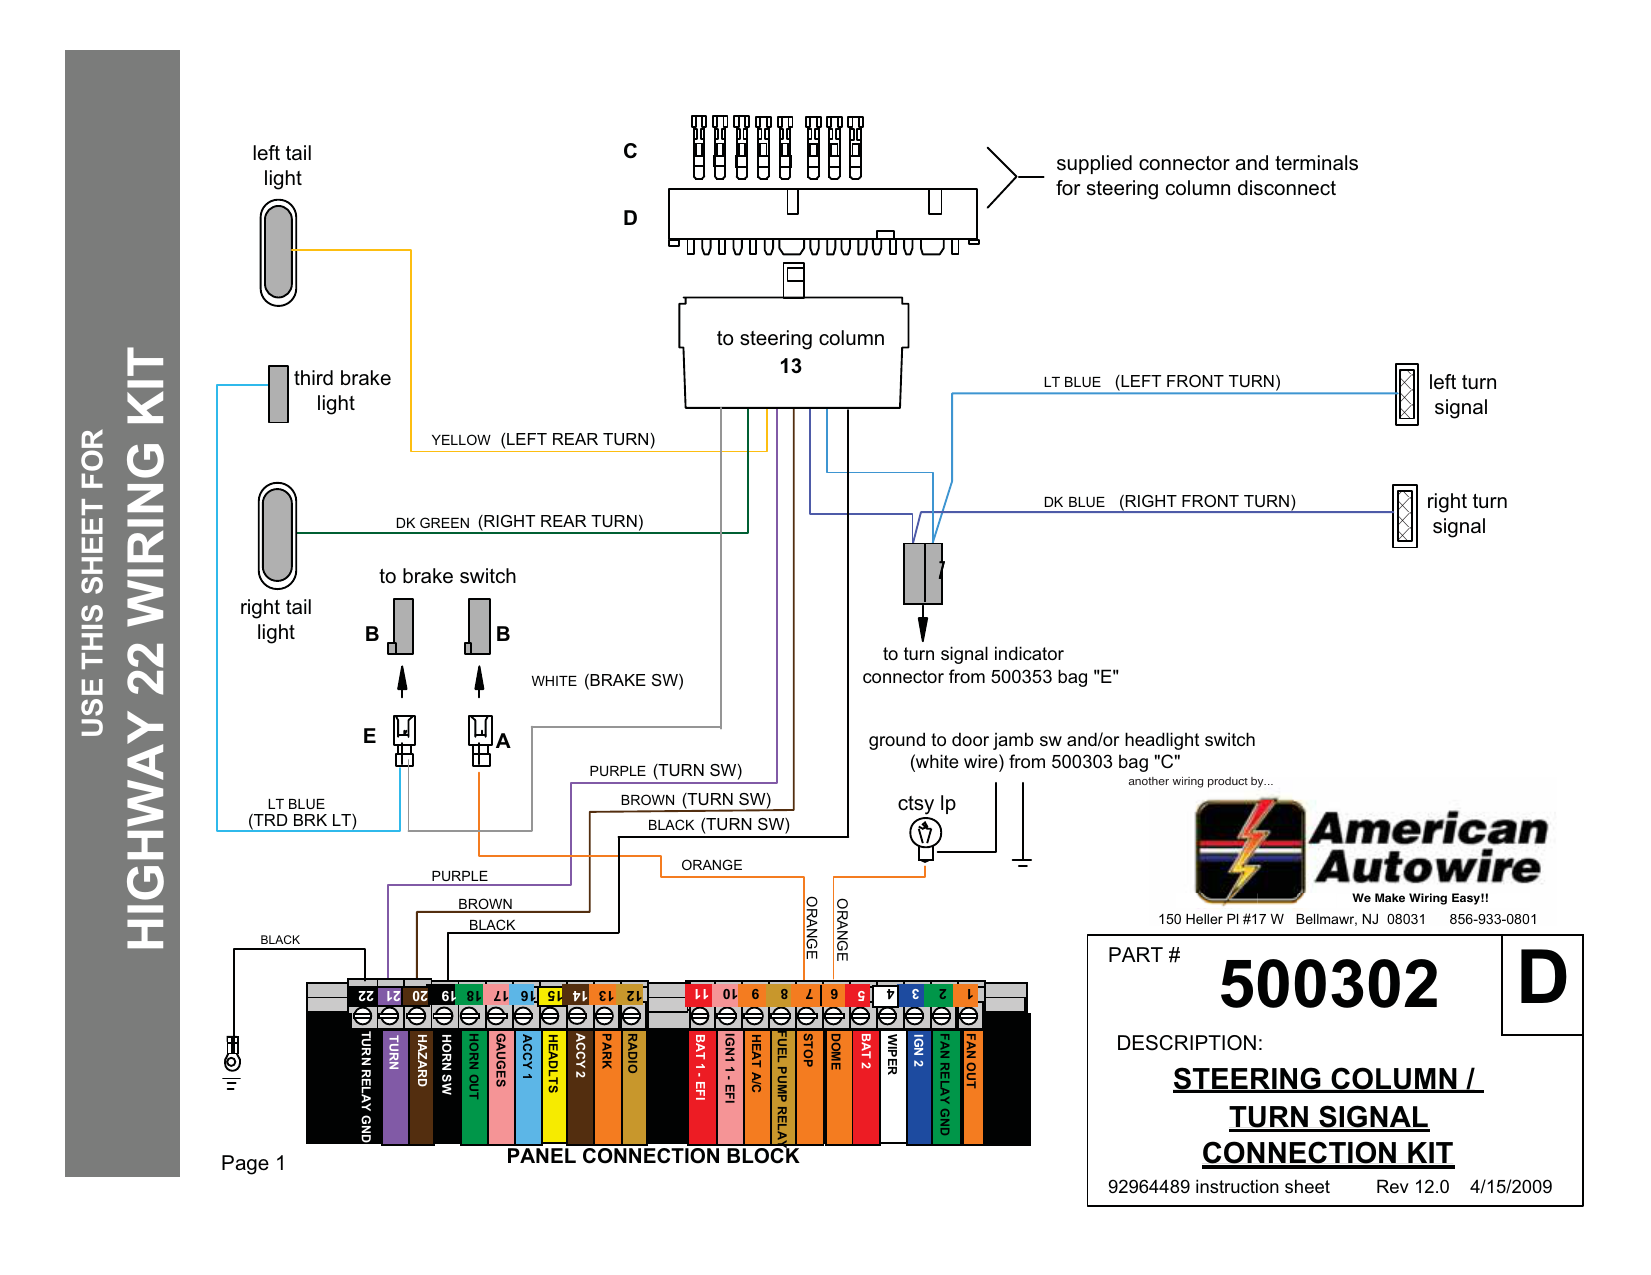 American Autowire Turn Signal Switch Wiring Diagram from s3.manualzz.com